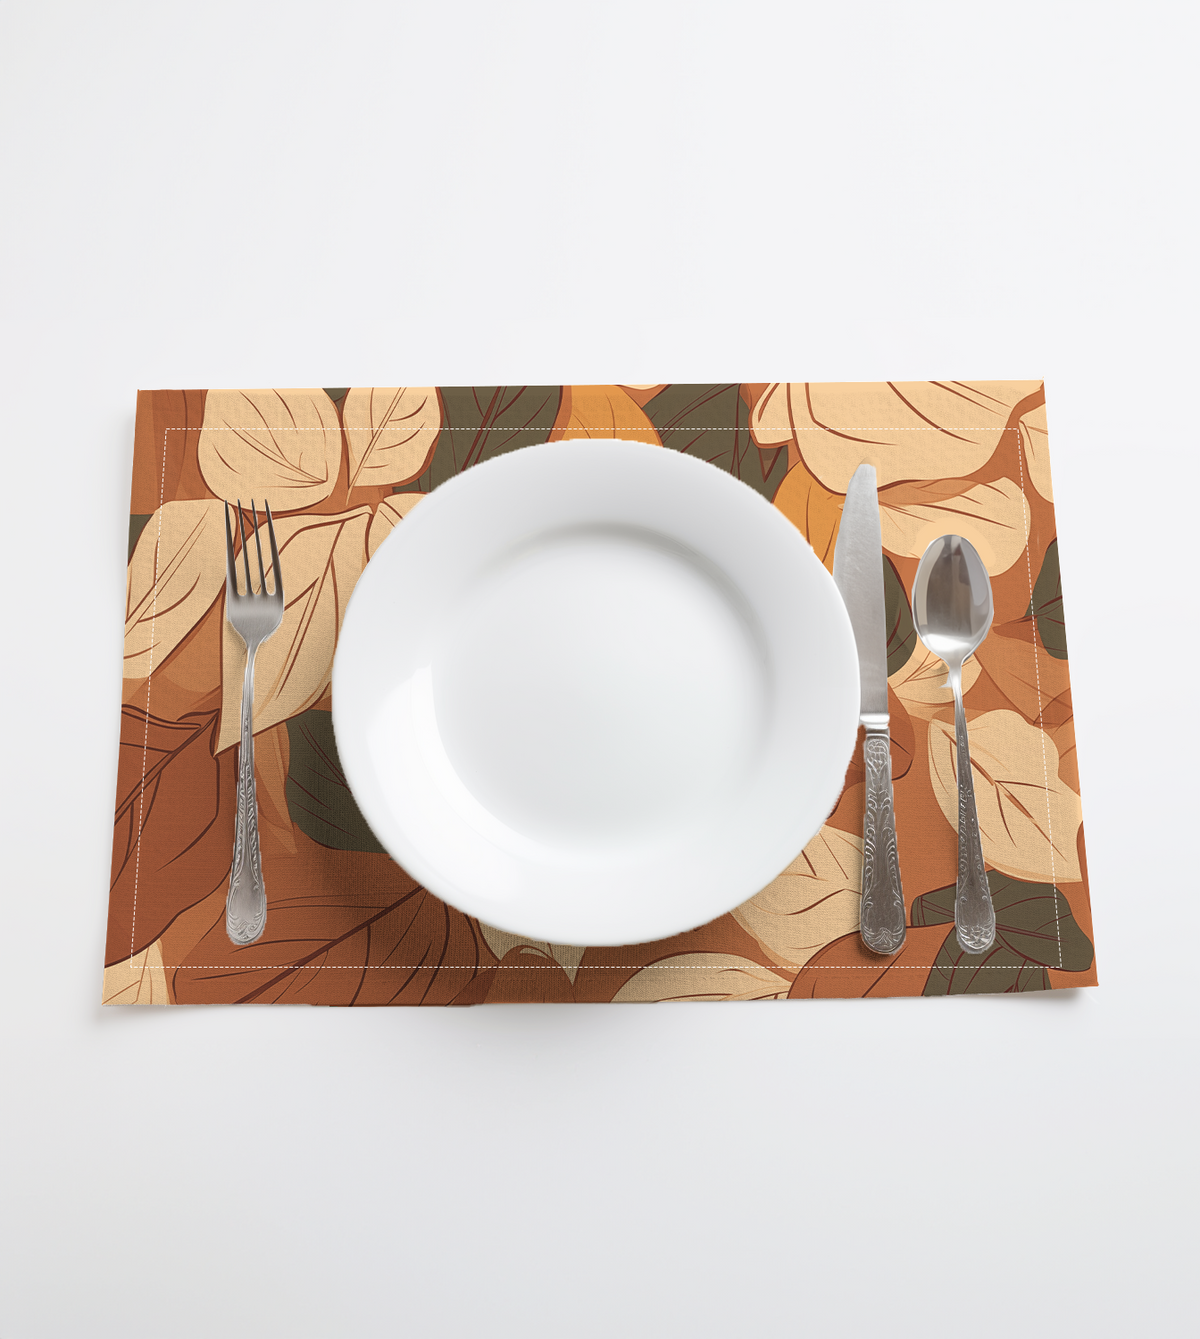 Rustling Leaf Foilage Placemat | Hypoallergenic - Allergy Friendly - Naturally Free